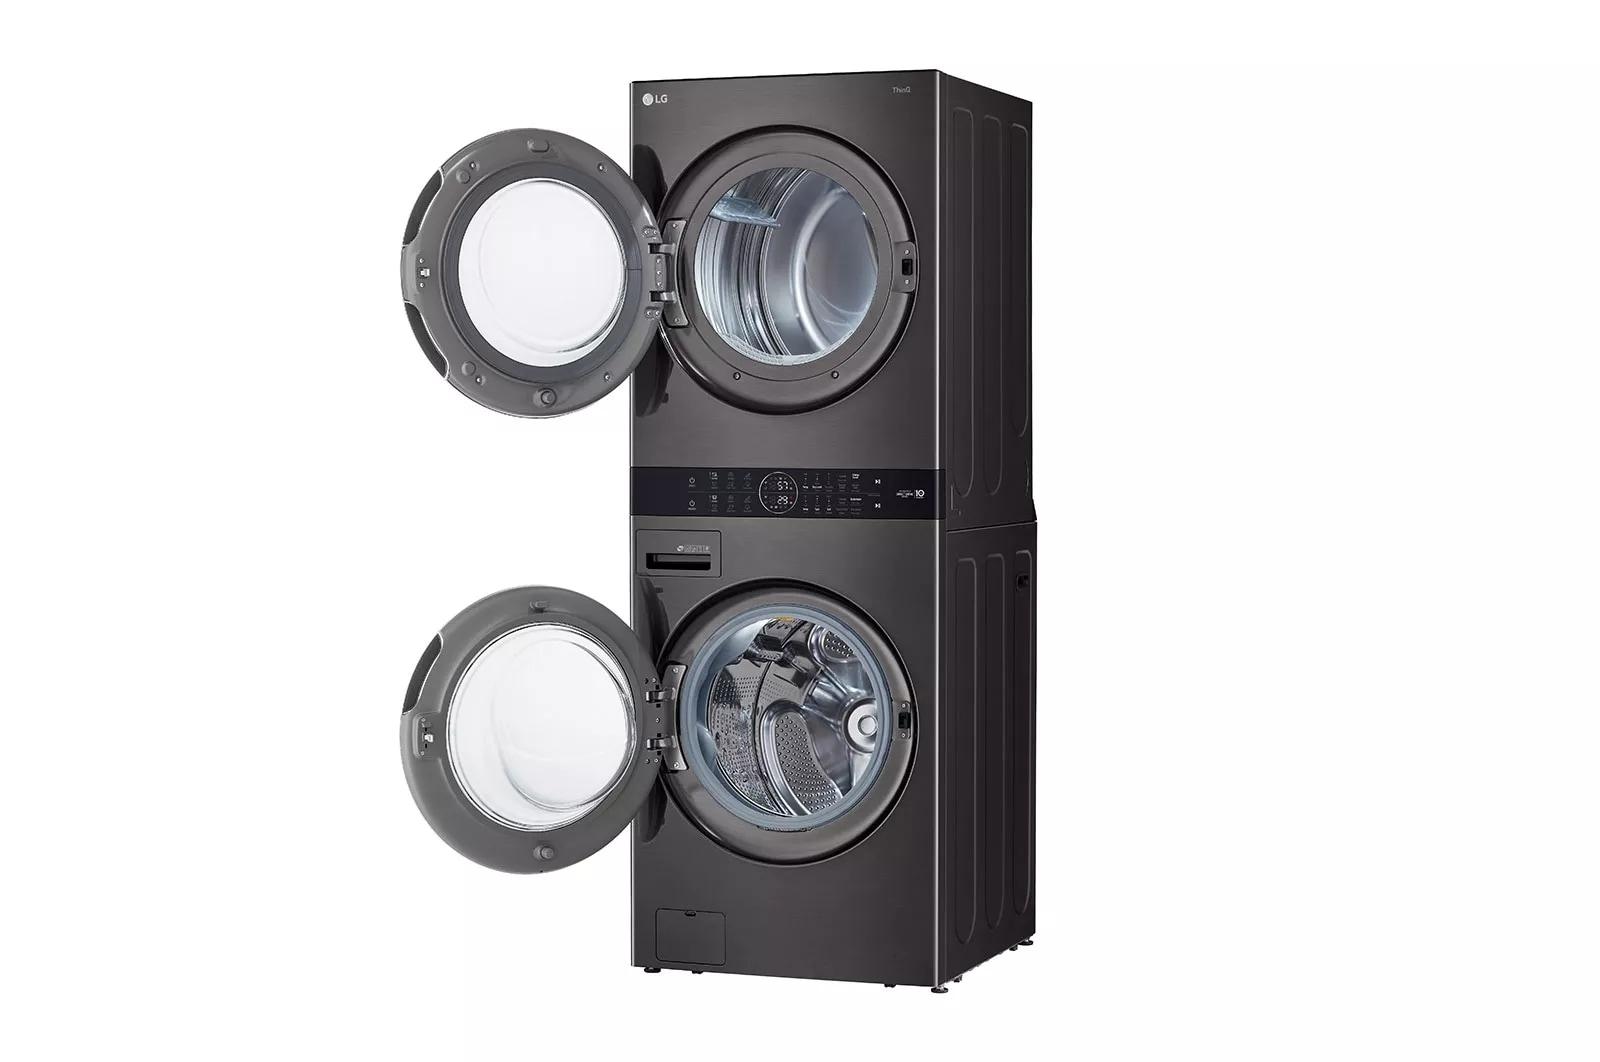 LG Electric Washer Tower - image 5 of 5